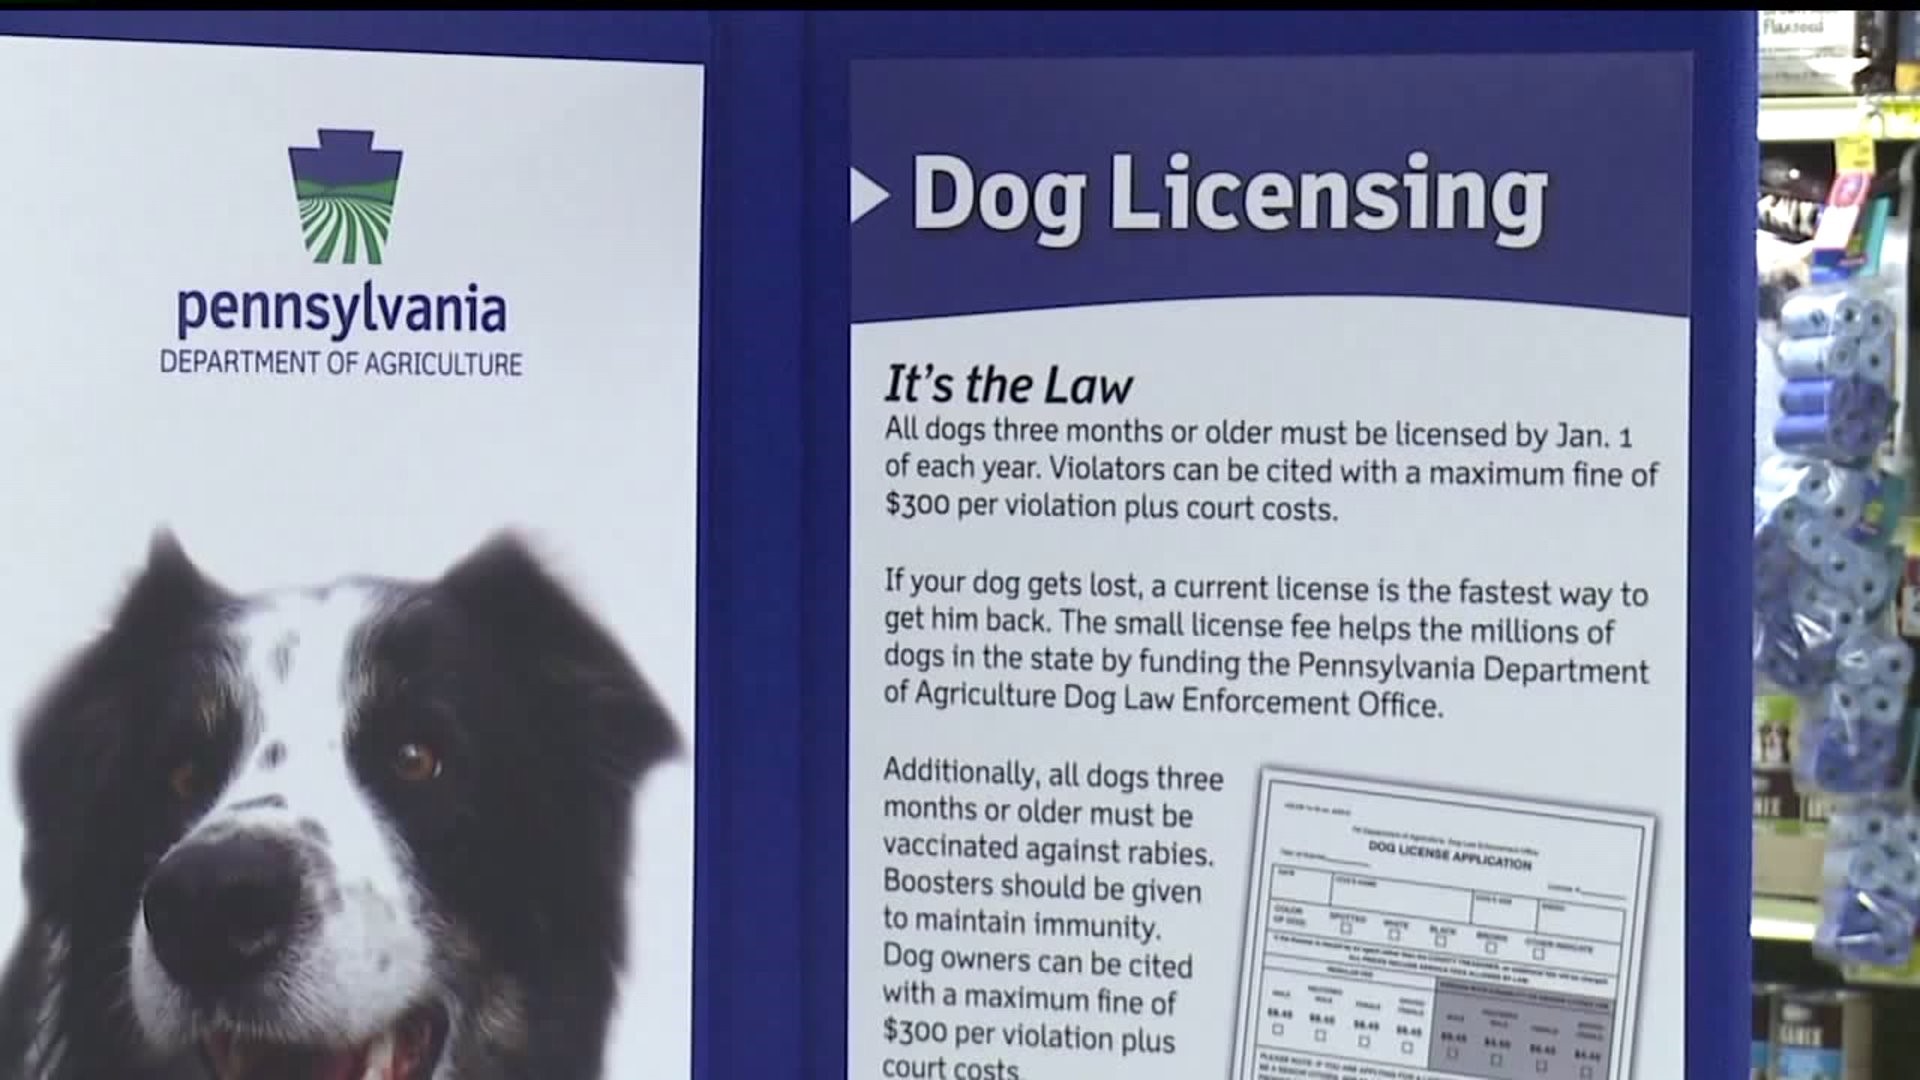 Dog wardens across PA going door-to-door, checking for dog licenses